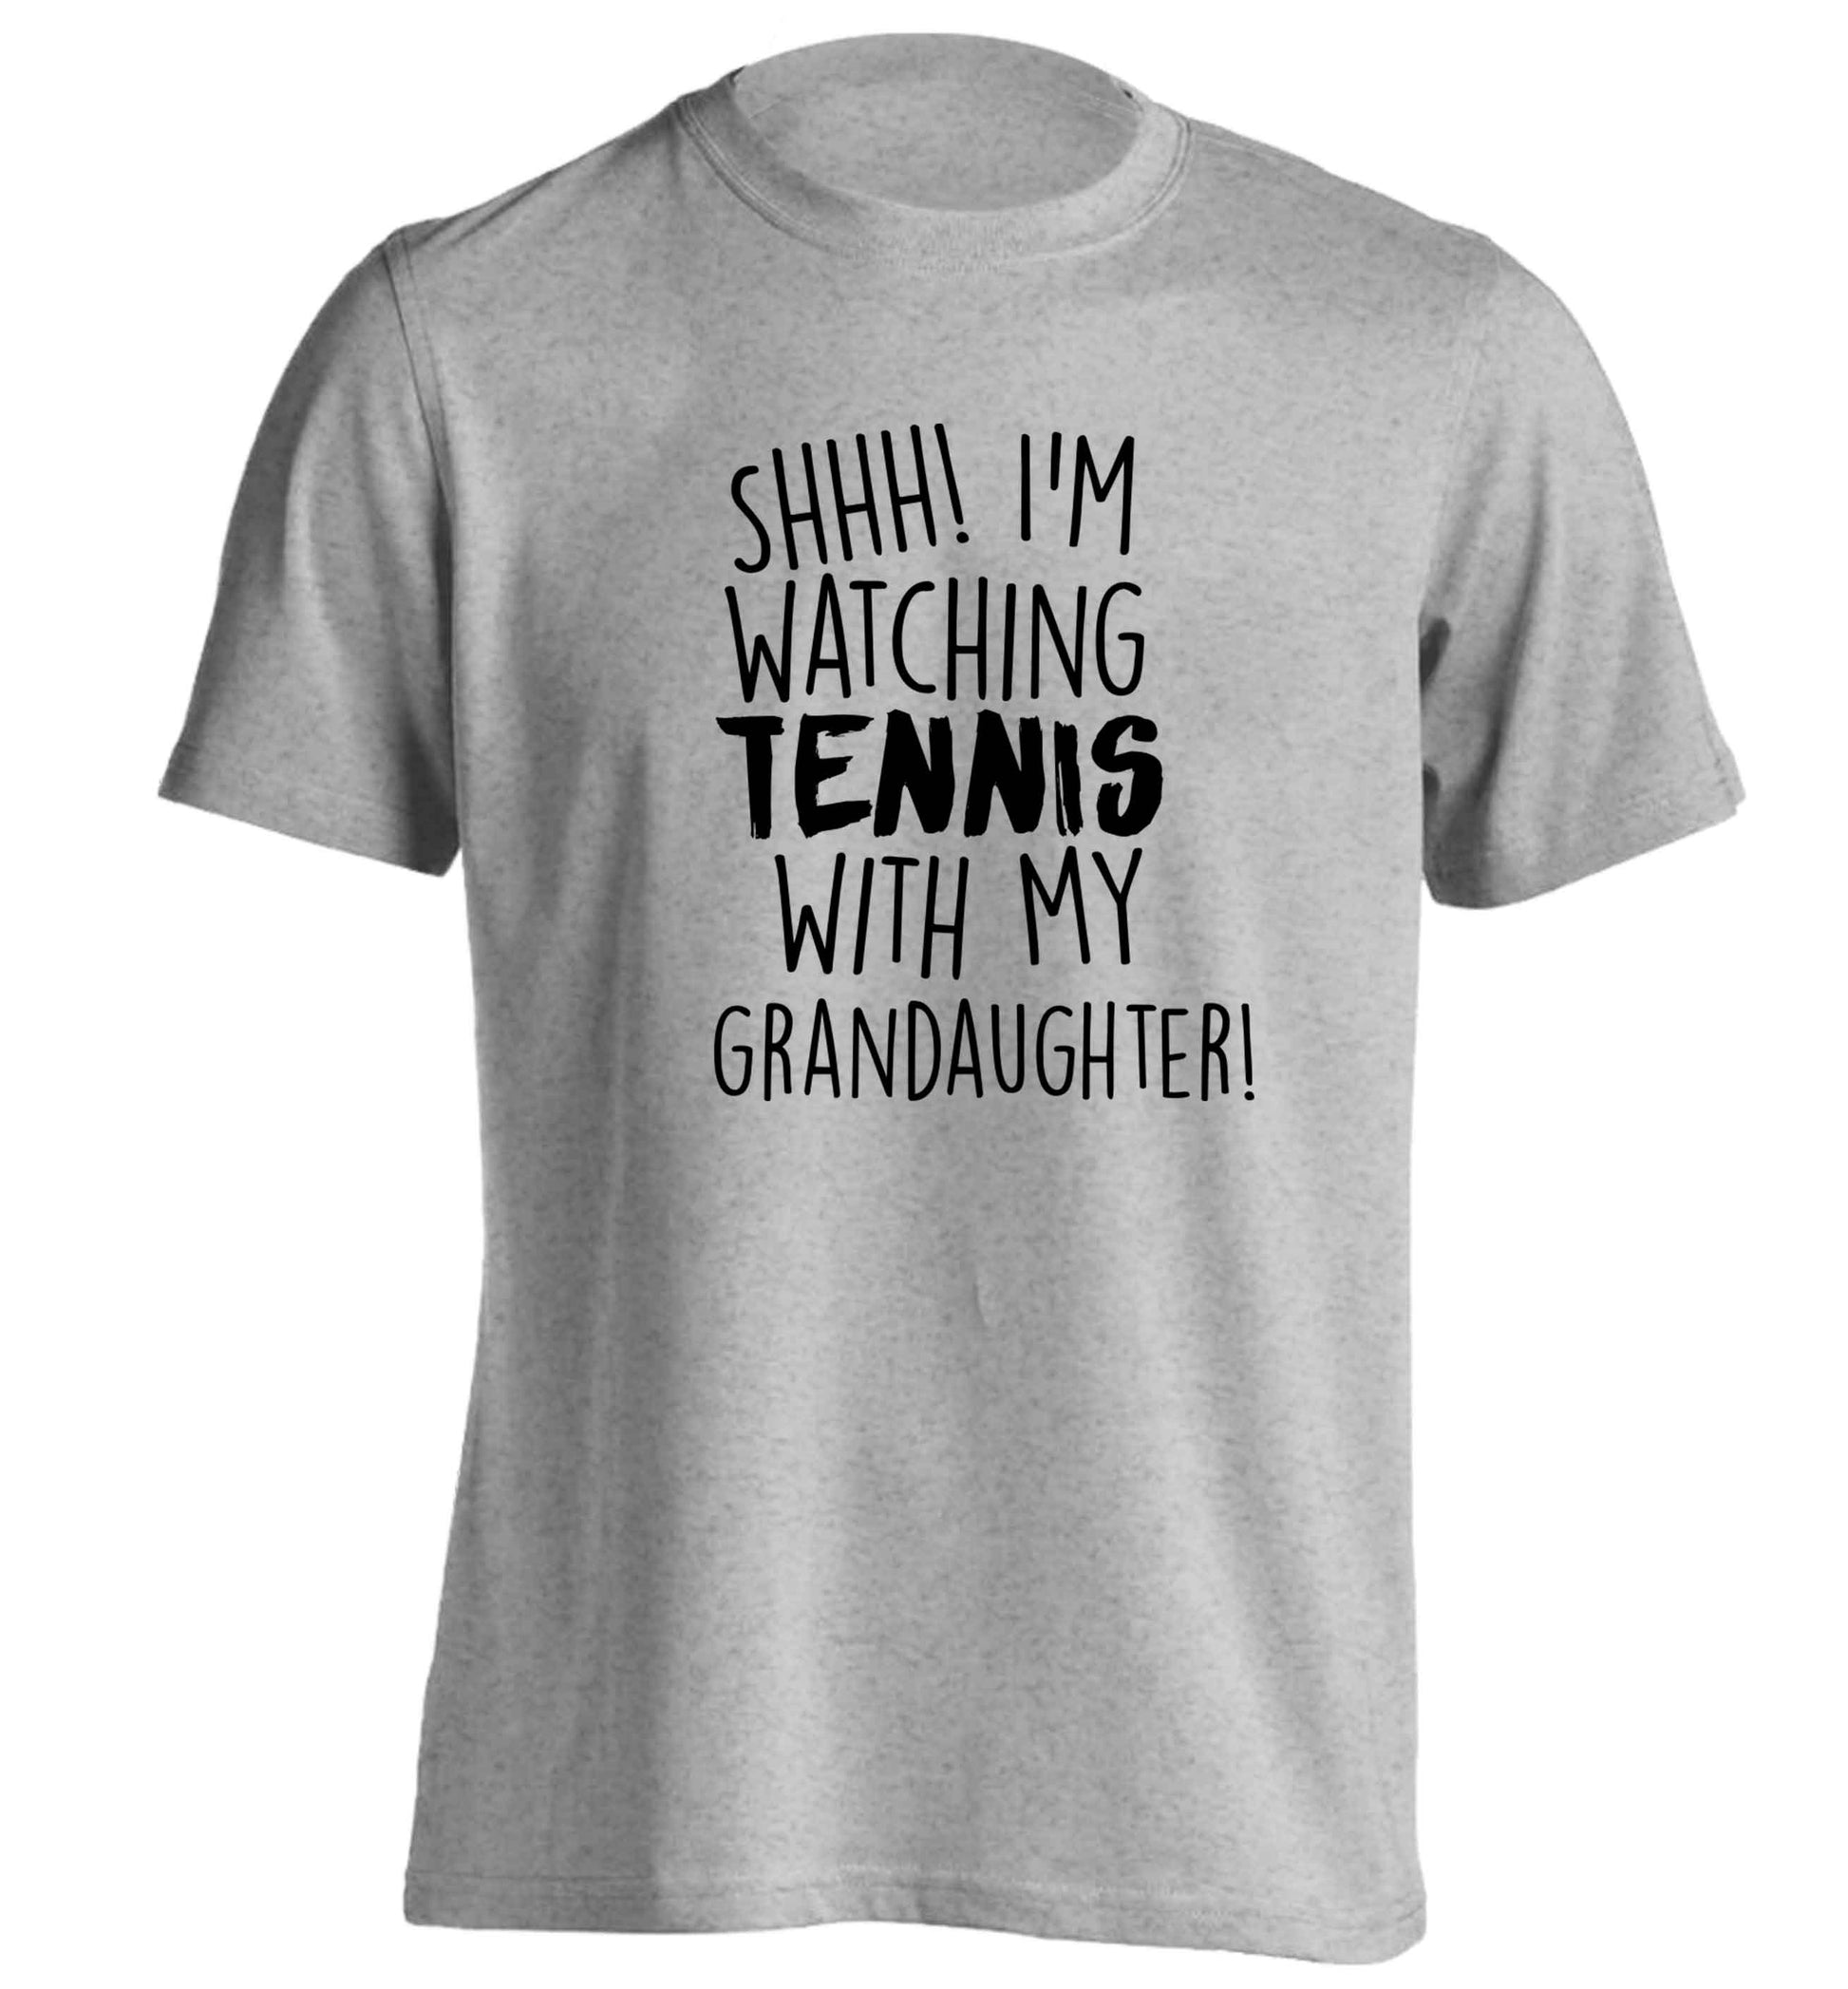 Shh! I'm watching tennis with my granddaughter! adults unisex grey Tshirt 2XL